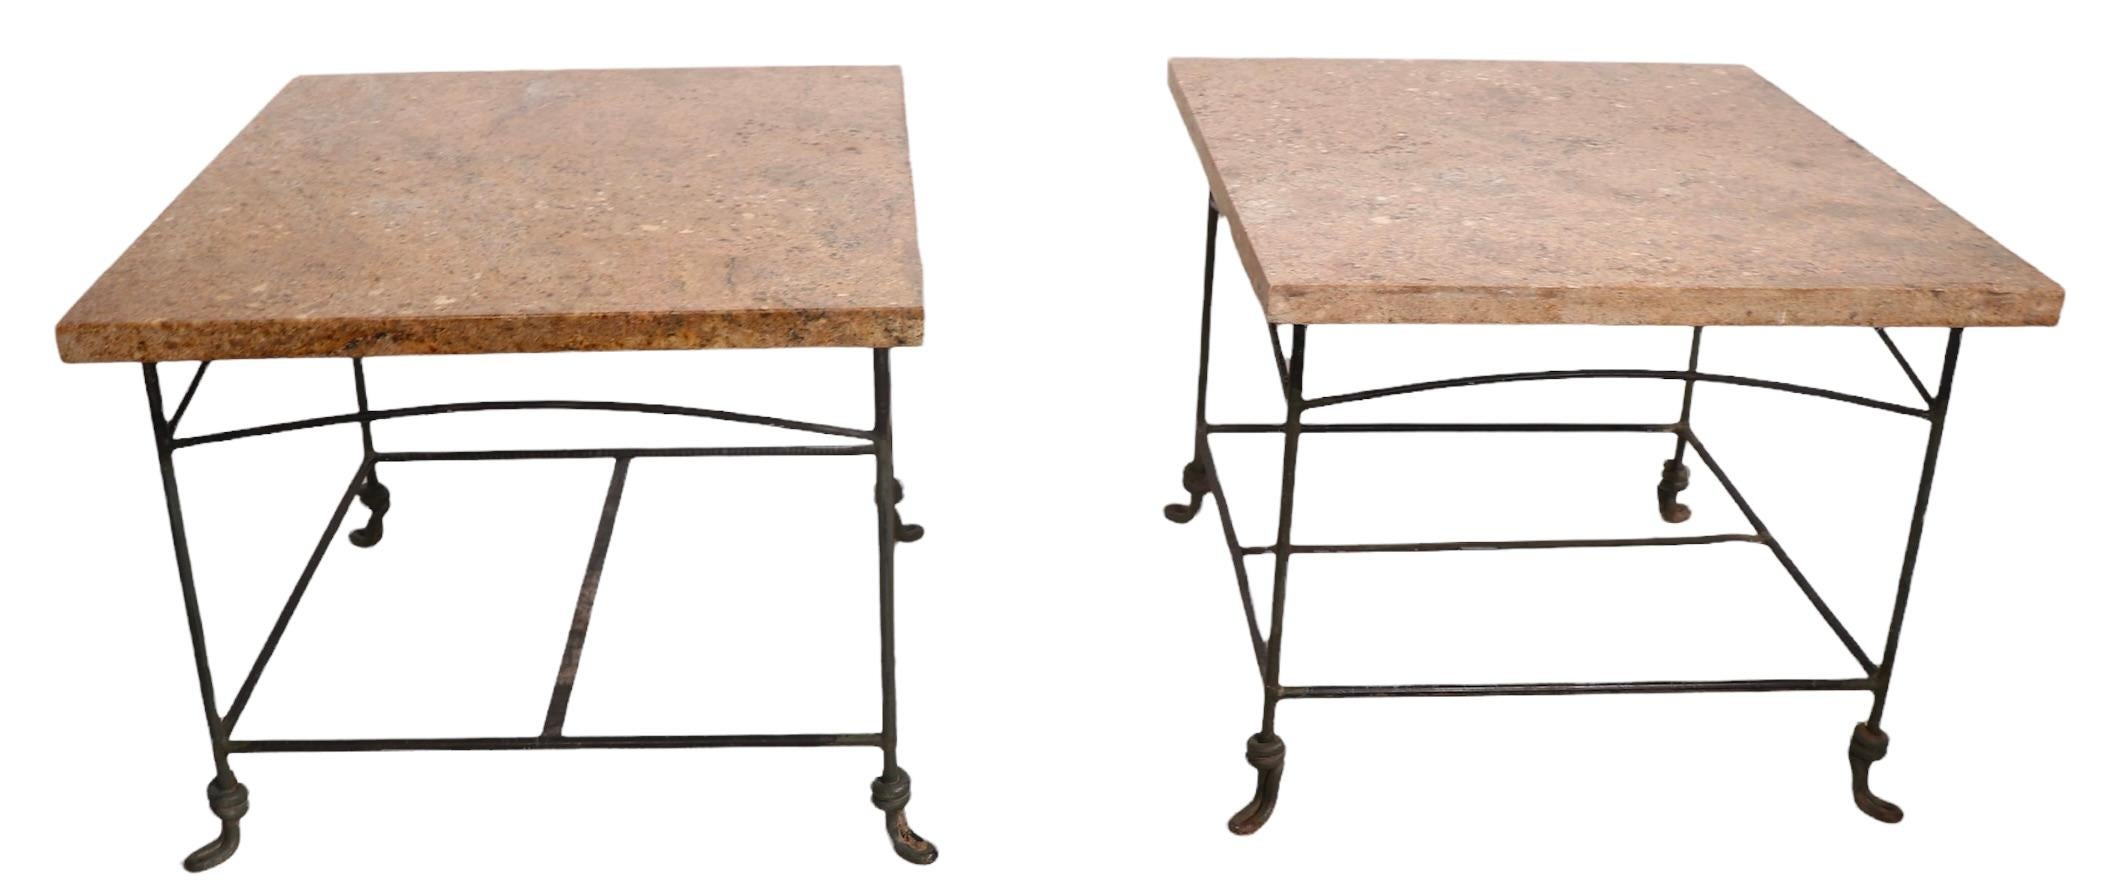 Pr. Wrought Iron Garden Patio End Tables with Polished Granite Tops 4